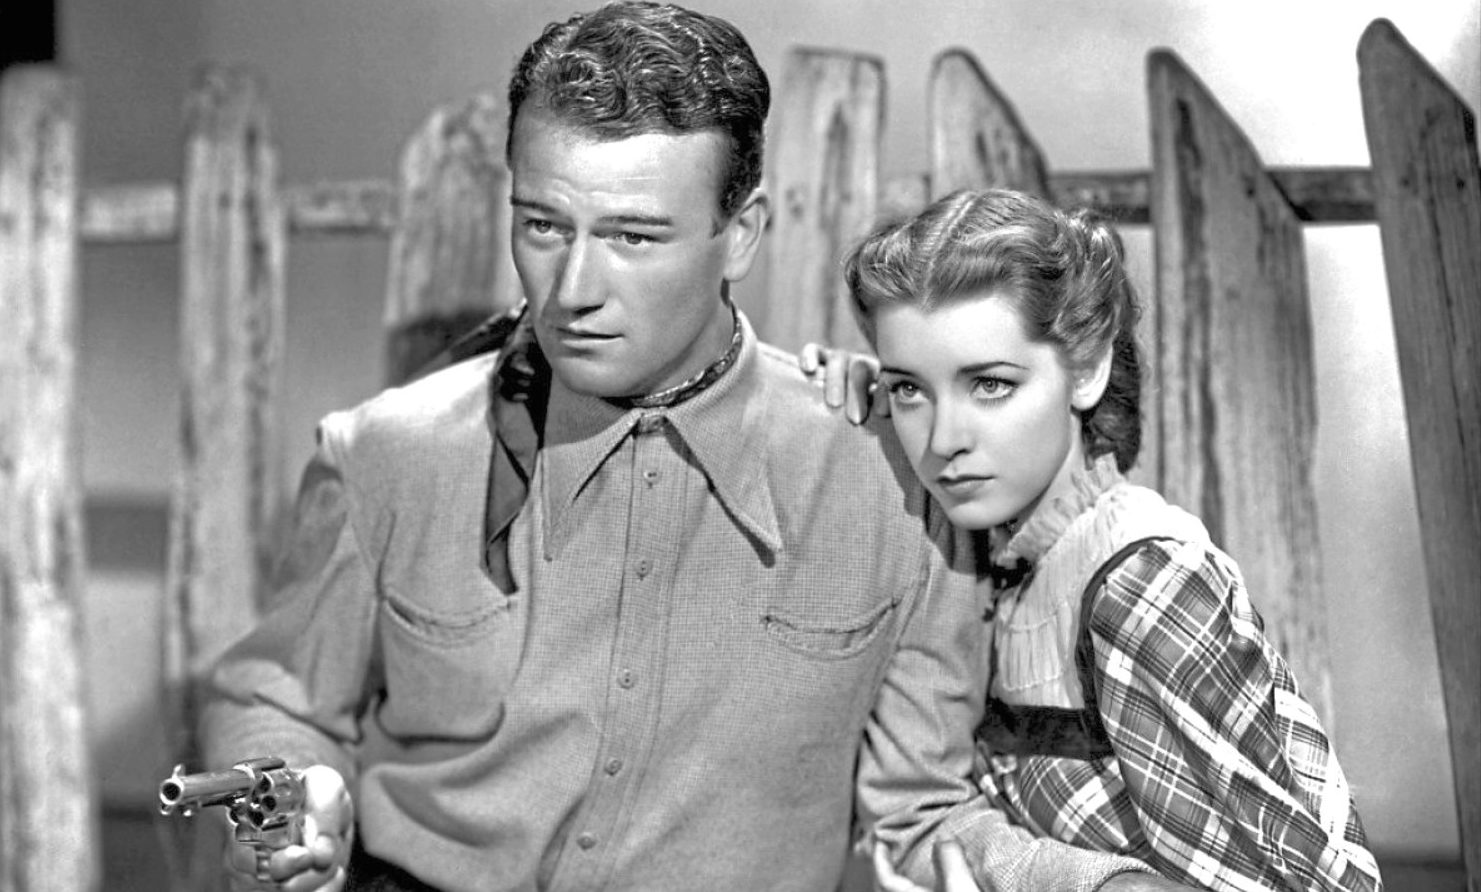 The fresh-faced duo of Marsha Hunt and John Wayne exhibited real chemistry in Born To The West, back in 1937.